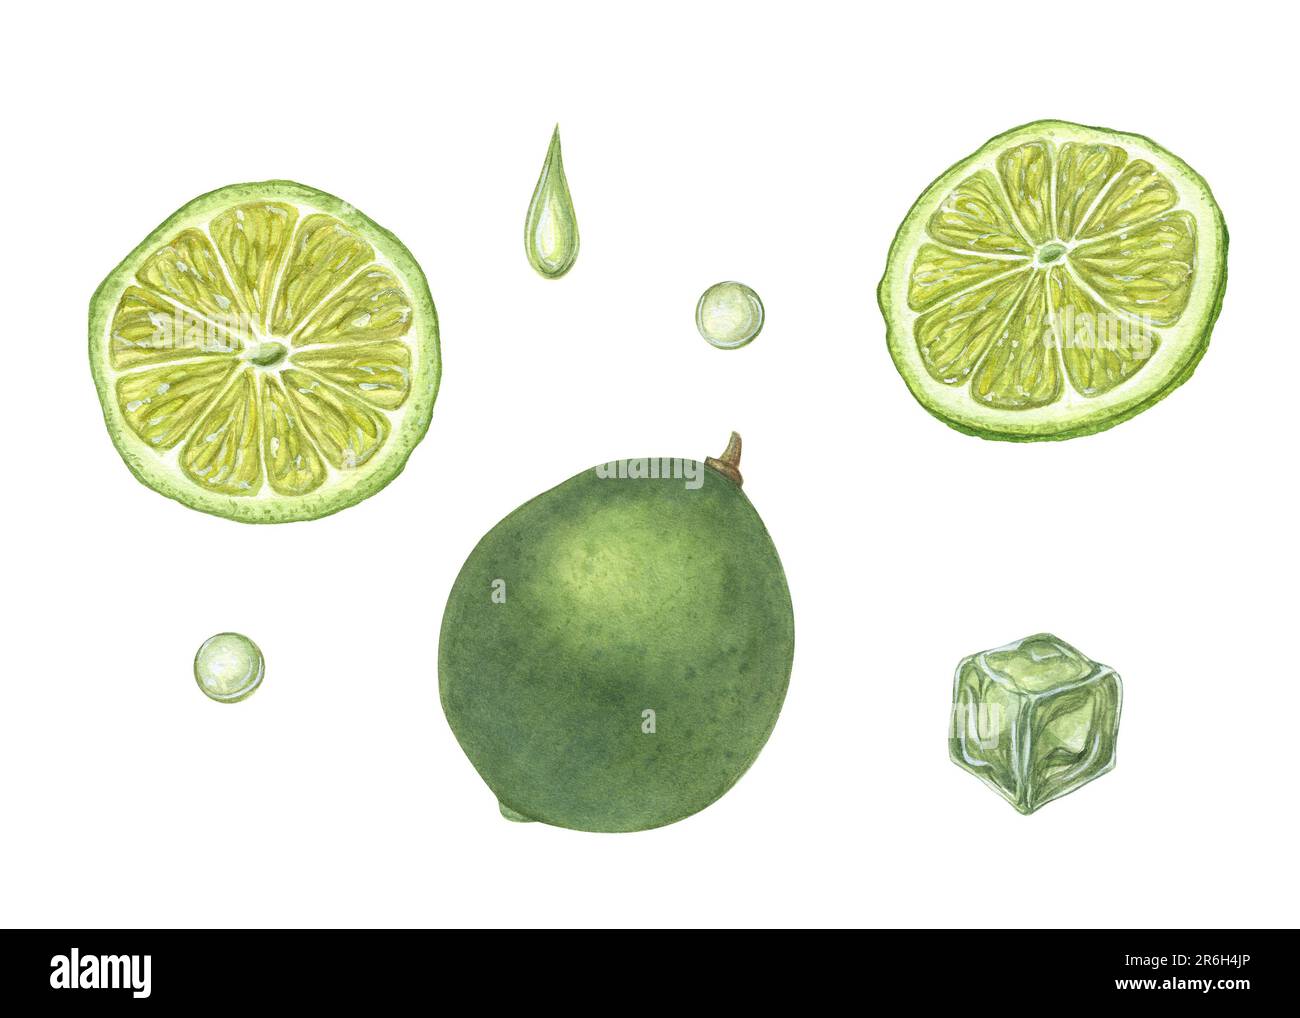 Watercolor set of slices and whole limes, drops, ice cube isolated on white background. Botanical illustration of mojito ingredients for menu, cocktai Stock Photo